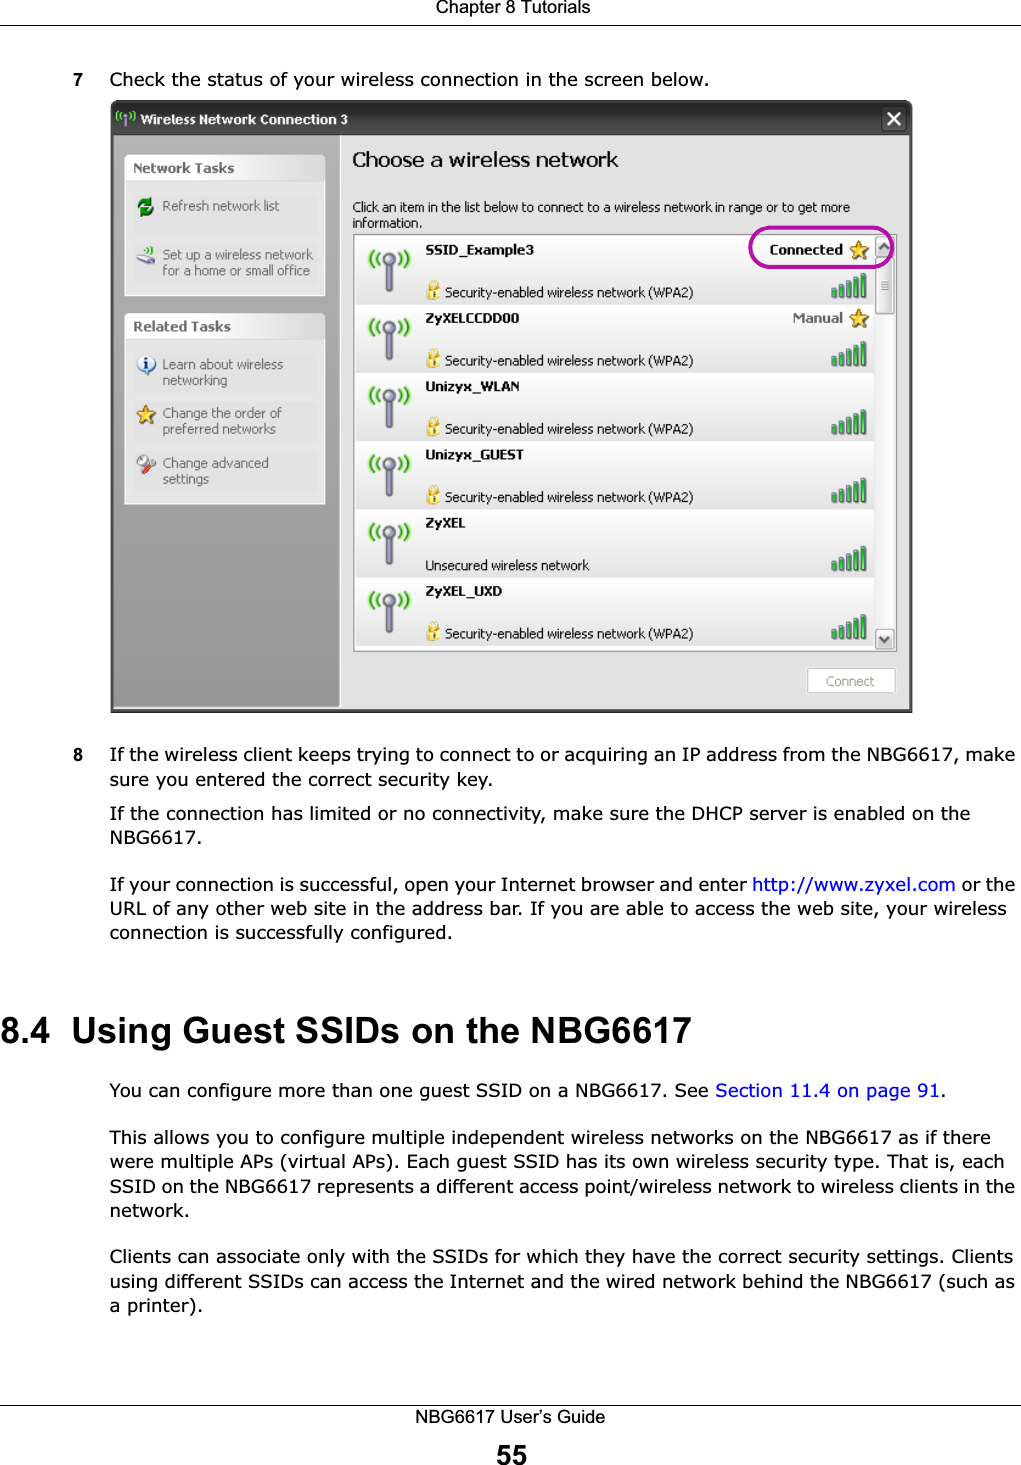  Chapter 8 TutorialsNBG6617 User’s Guide557Check the status of your wireless connection in the screen below.  8If the wireless client keeps trying to connect to or acquiring an IP address from the NBG6617, make sure you entered the correct security key.If the connection has limited or no connectivity, make sure the DHCP server is enabled on the NBG6617.If your connection is successful, open your Internet browser and enter http://www.zyxel.com or the URL of any other web site in the address bar. If you are able to access the web site, your wireless connection is successfully configured.8.4  Using Guest SSIDs on the NBG6617You can configure more than one guest SSID on a NBG6617. See Section 11.4 on page 91. This allows you to configure multiple independent wireless networks on the NBG6617 as if there were multiple APs (virtual APs). Each guest SSID has its own wireless security type. That is, each SSID on the NBG6617 represents a different access point/wireless network to wireless clients in the network. Clients can associate only with the SSIDs for which they have the correct security settings. Clients using different SSIDs can access the Internet and the wired network behind the NBG6617 (such as a printer). 